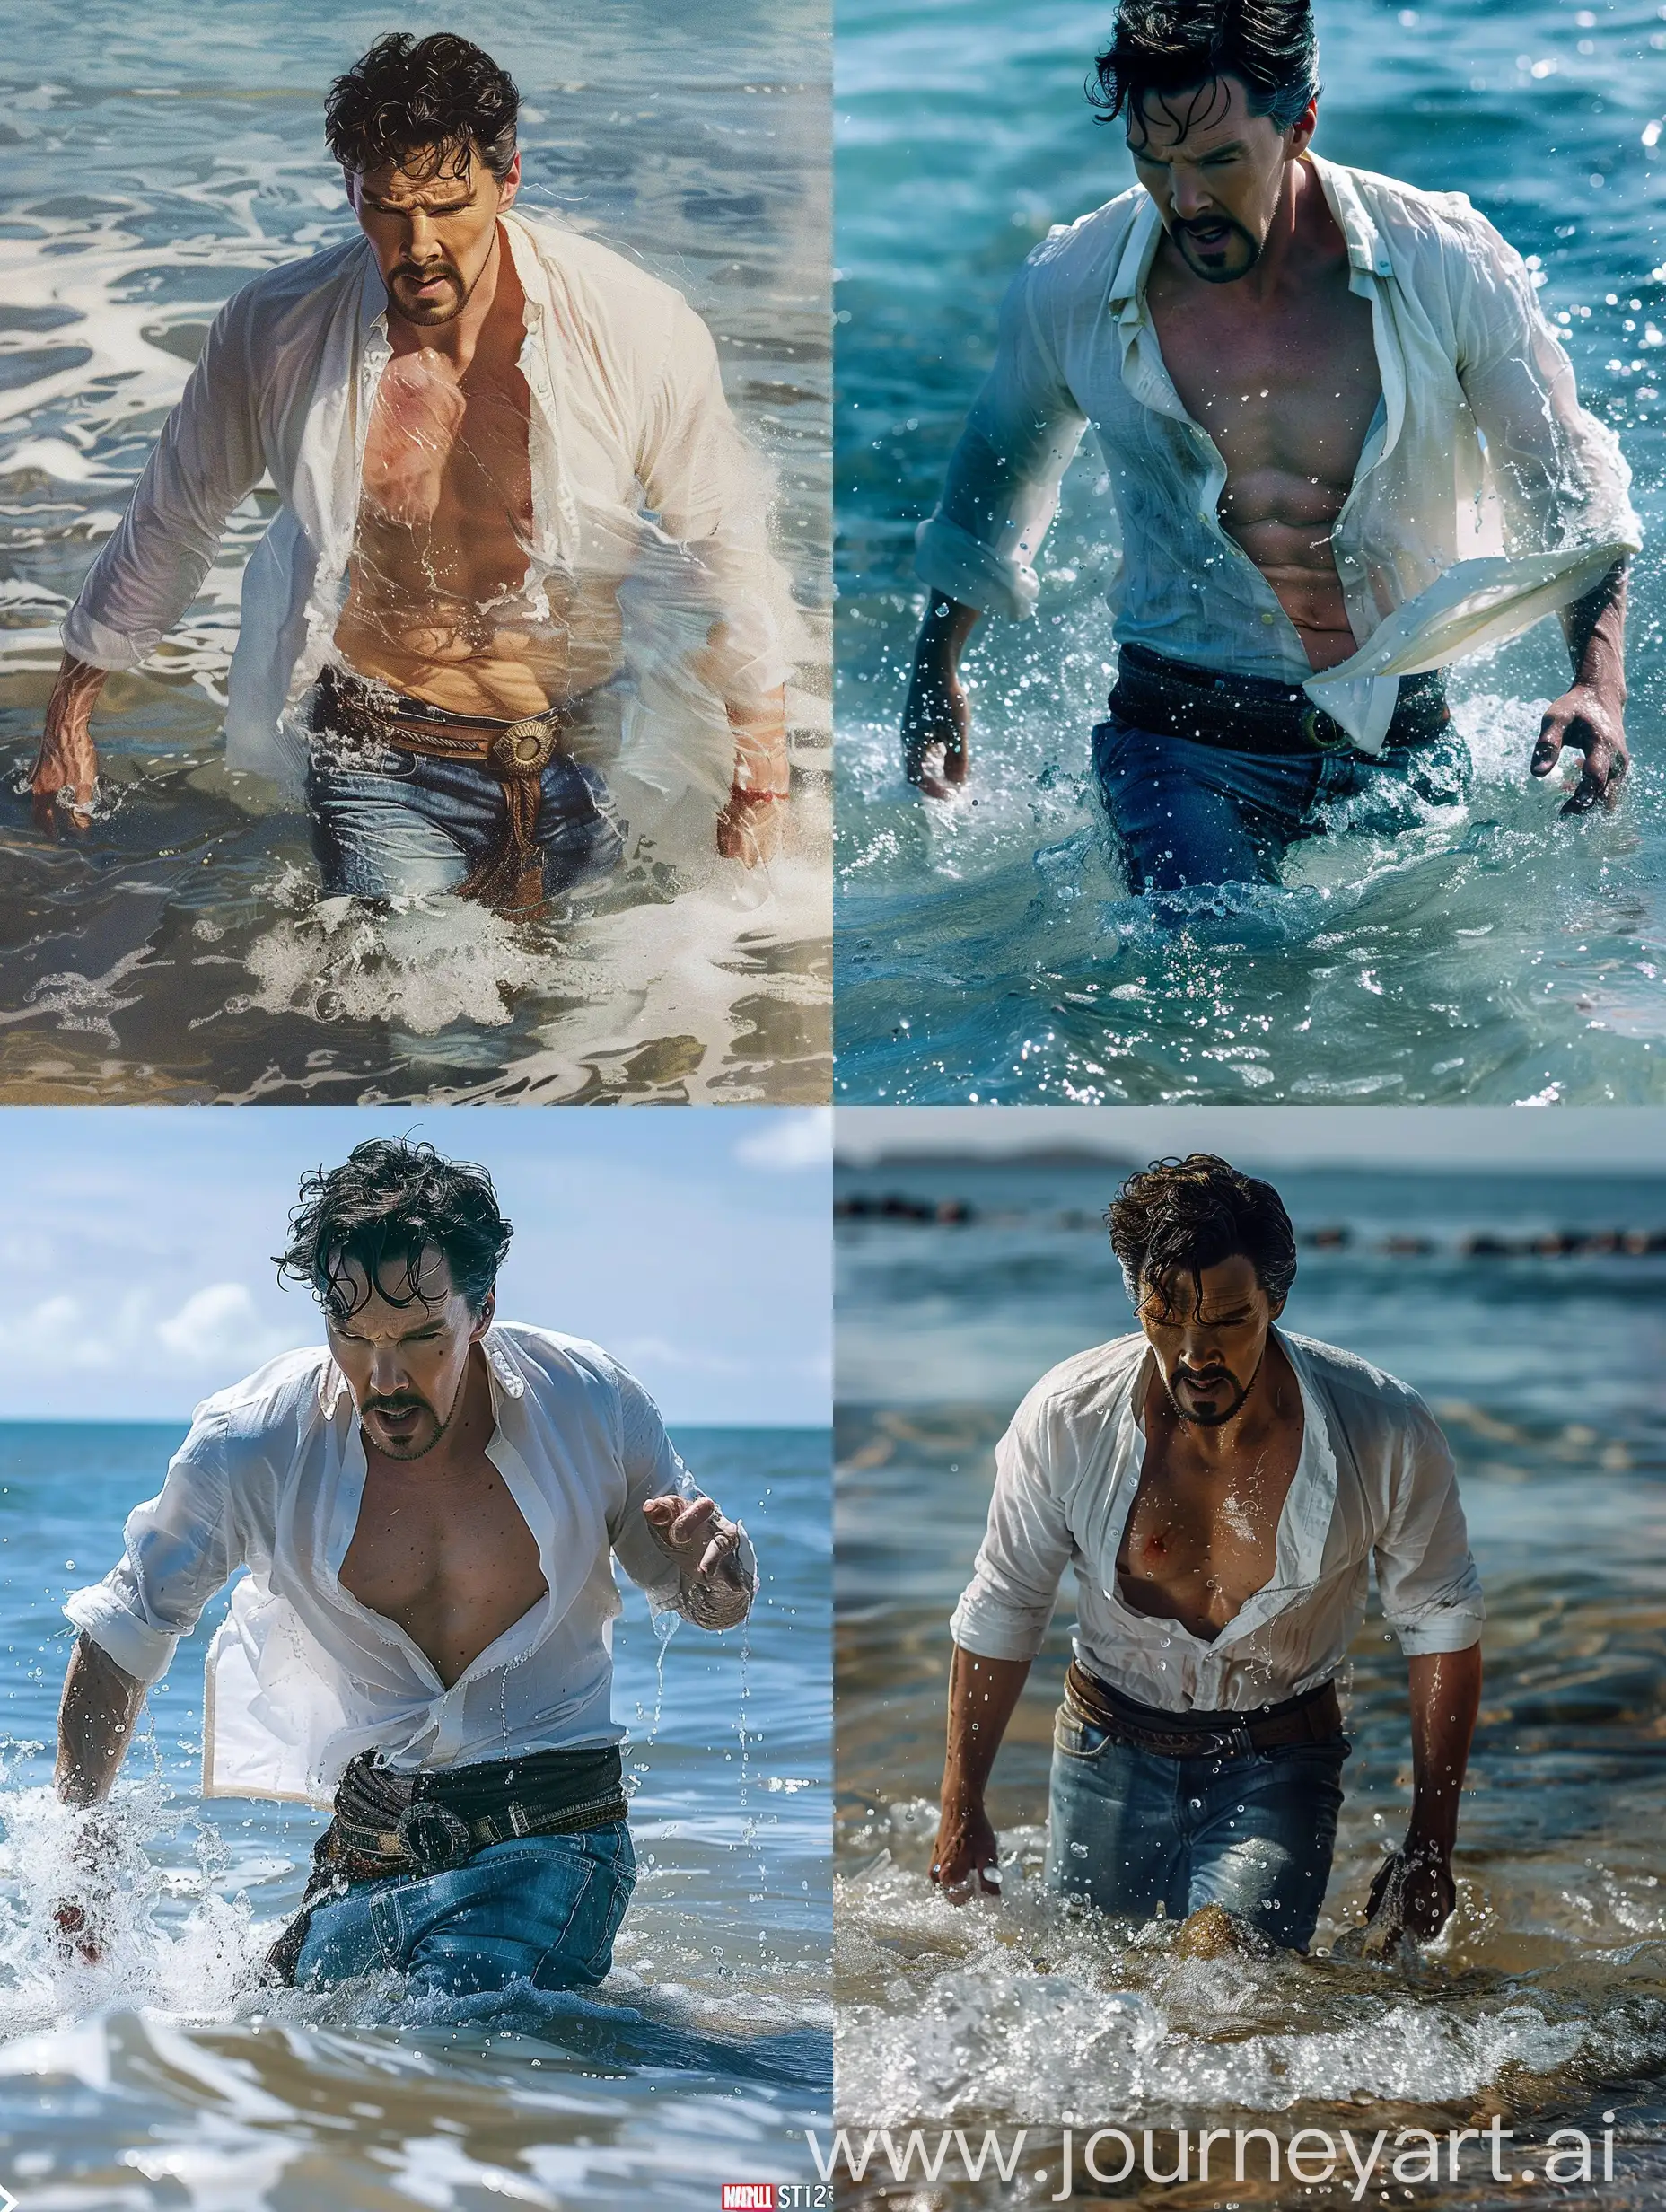 Doctor-Strange-Emerges-from-Sea-in-Wet-White-Shirt-and-Jeans